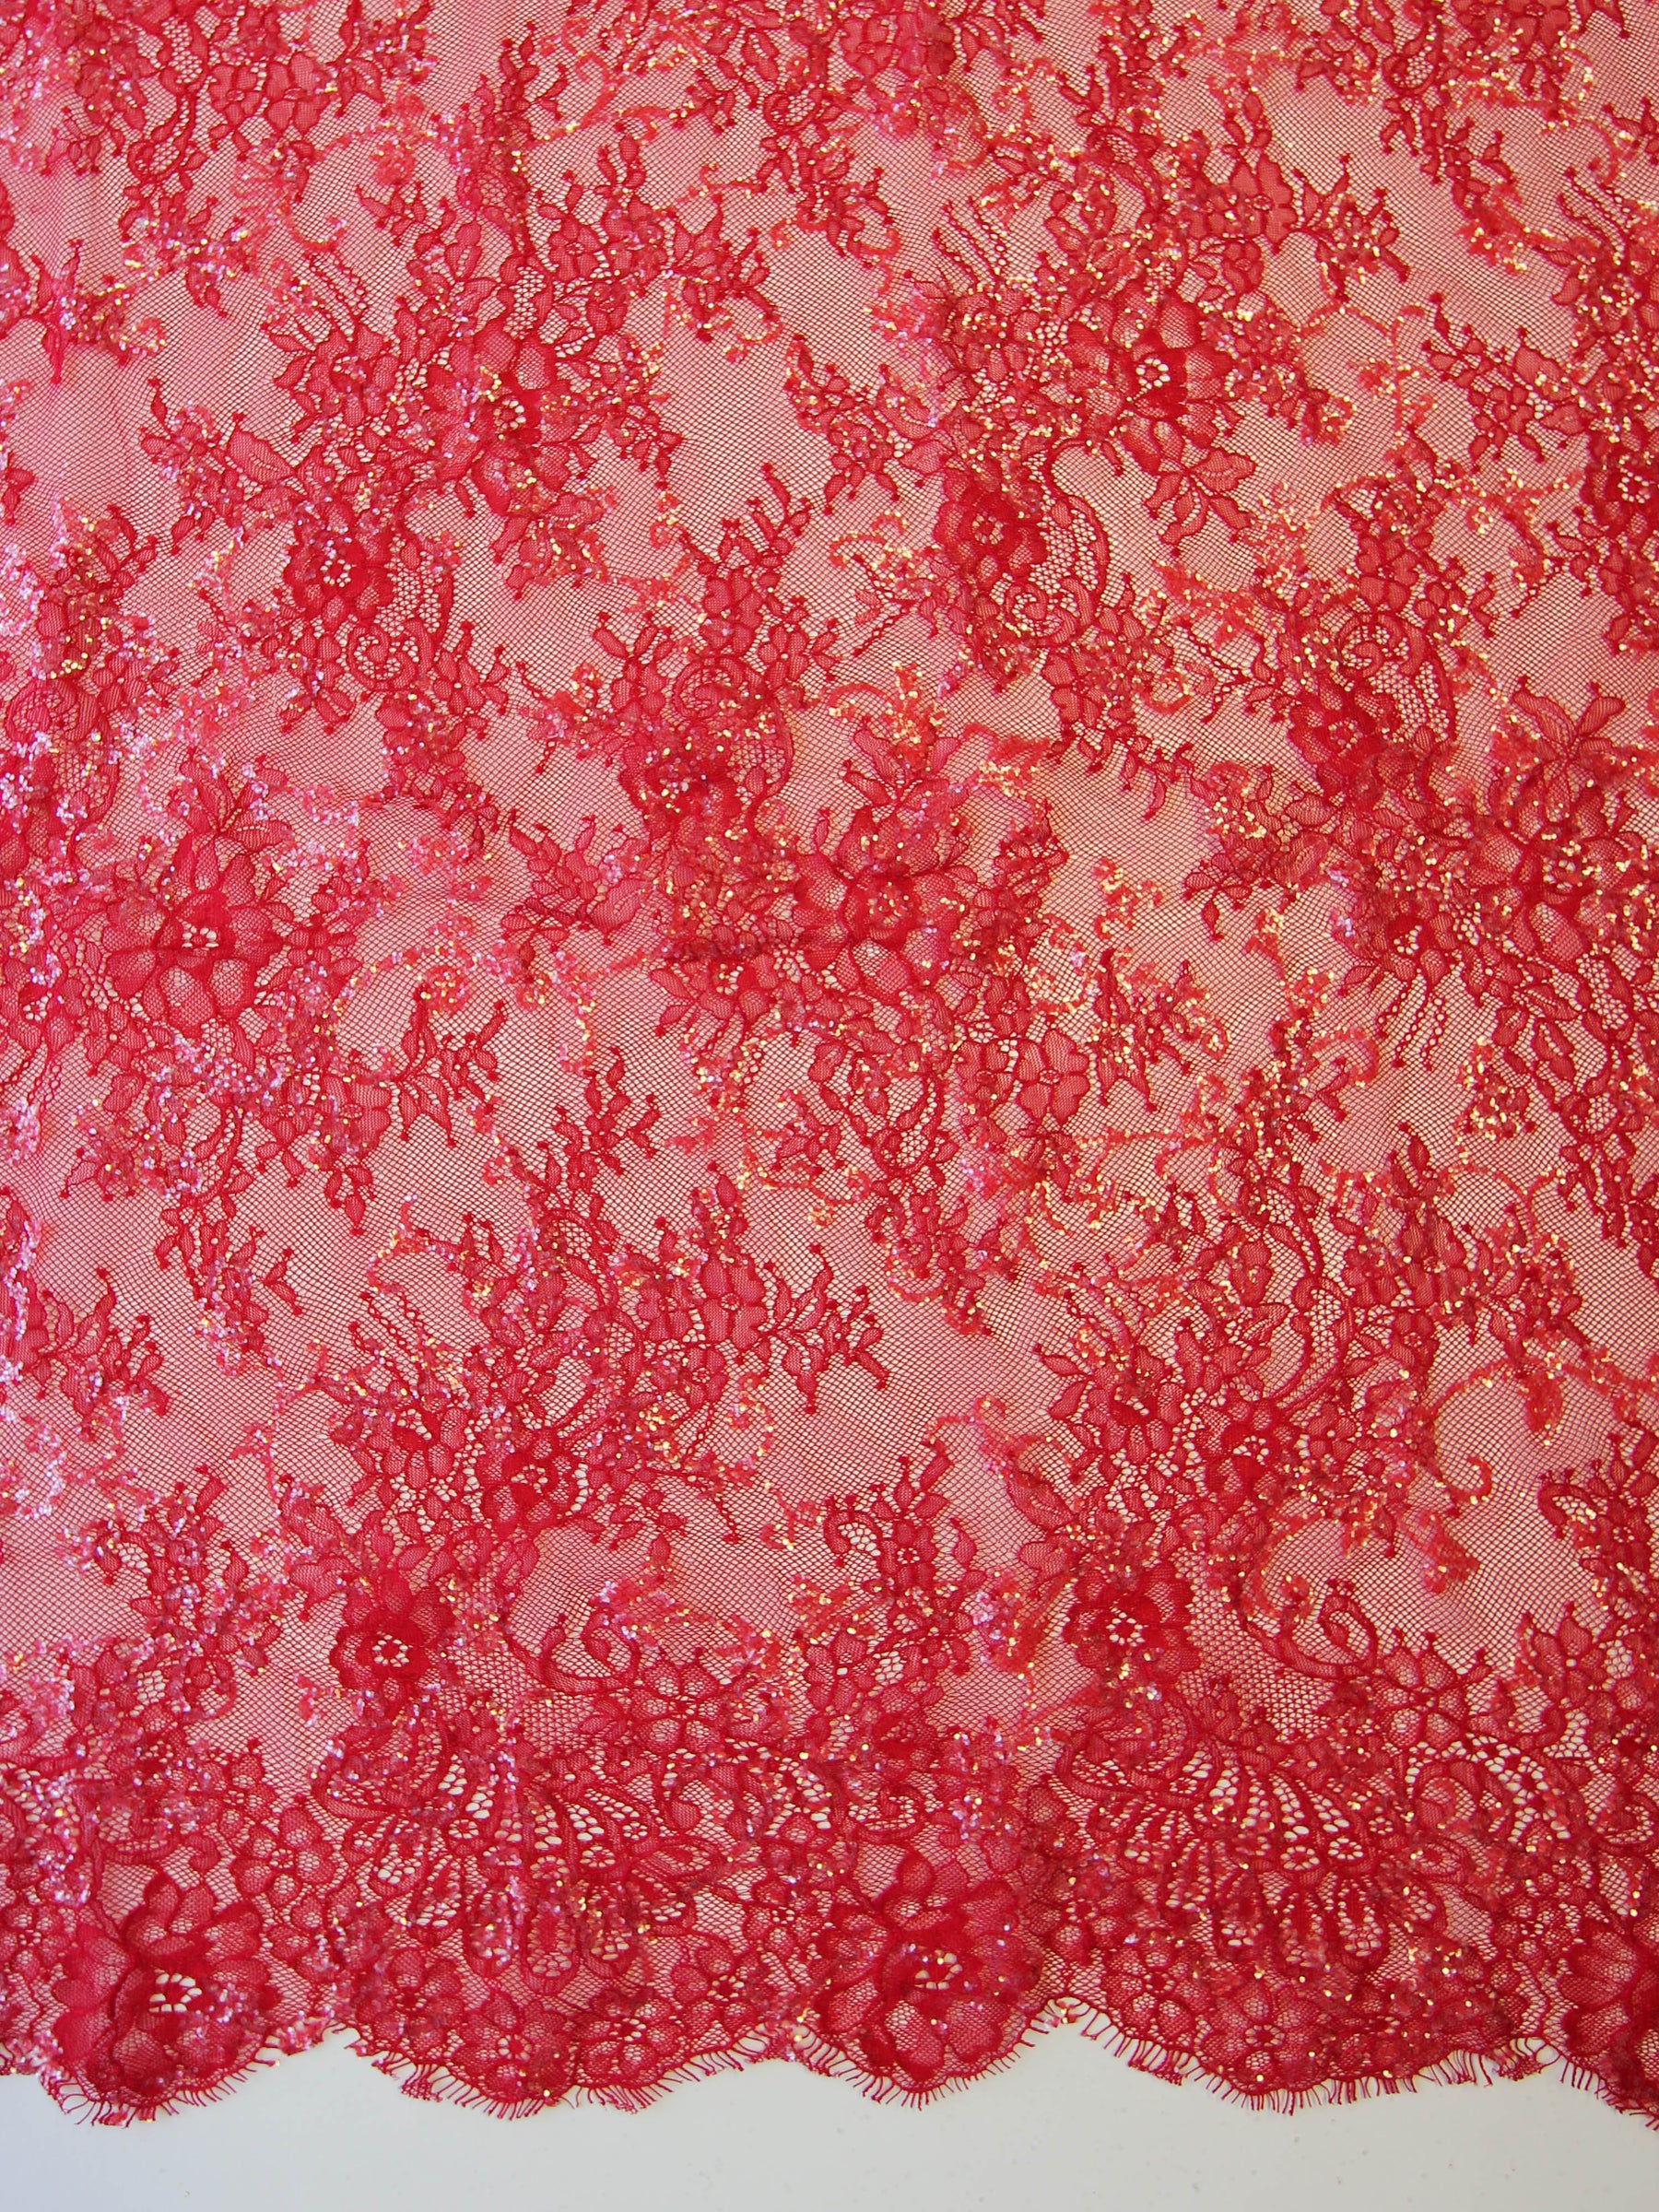 Red Raschel Lace - Honor